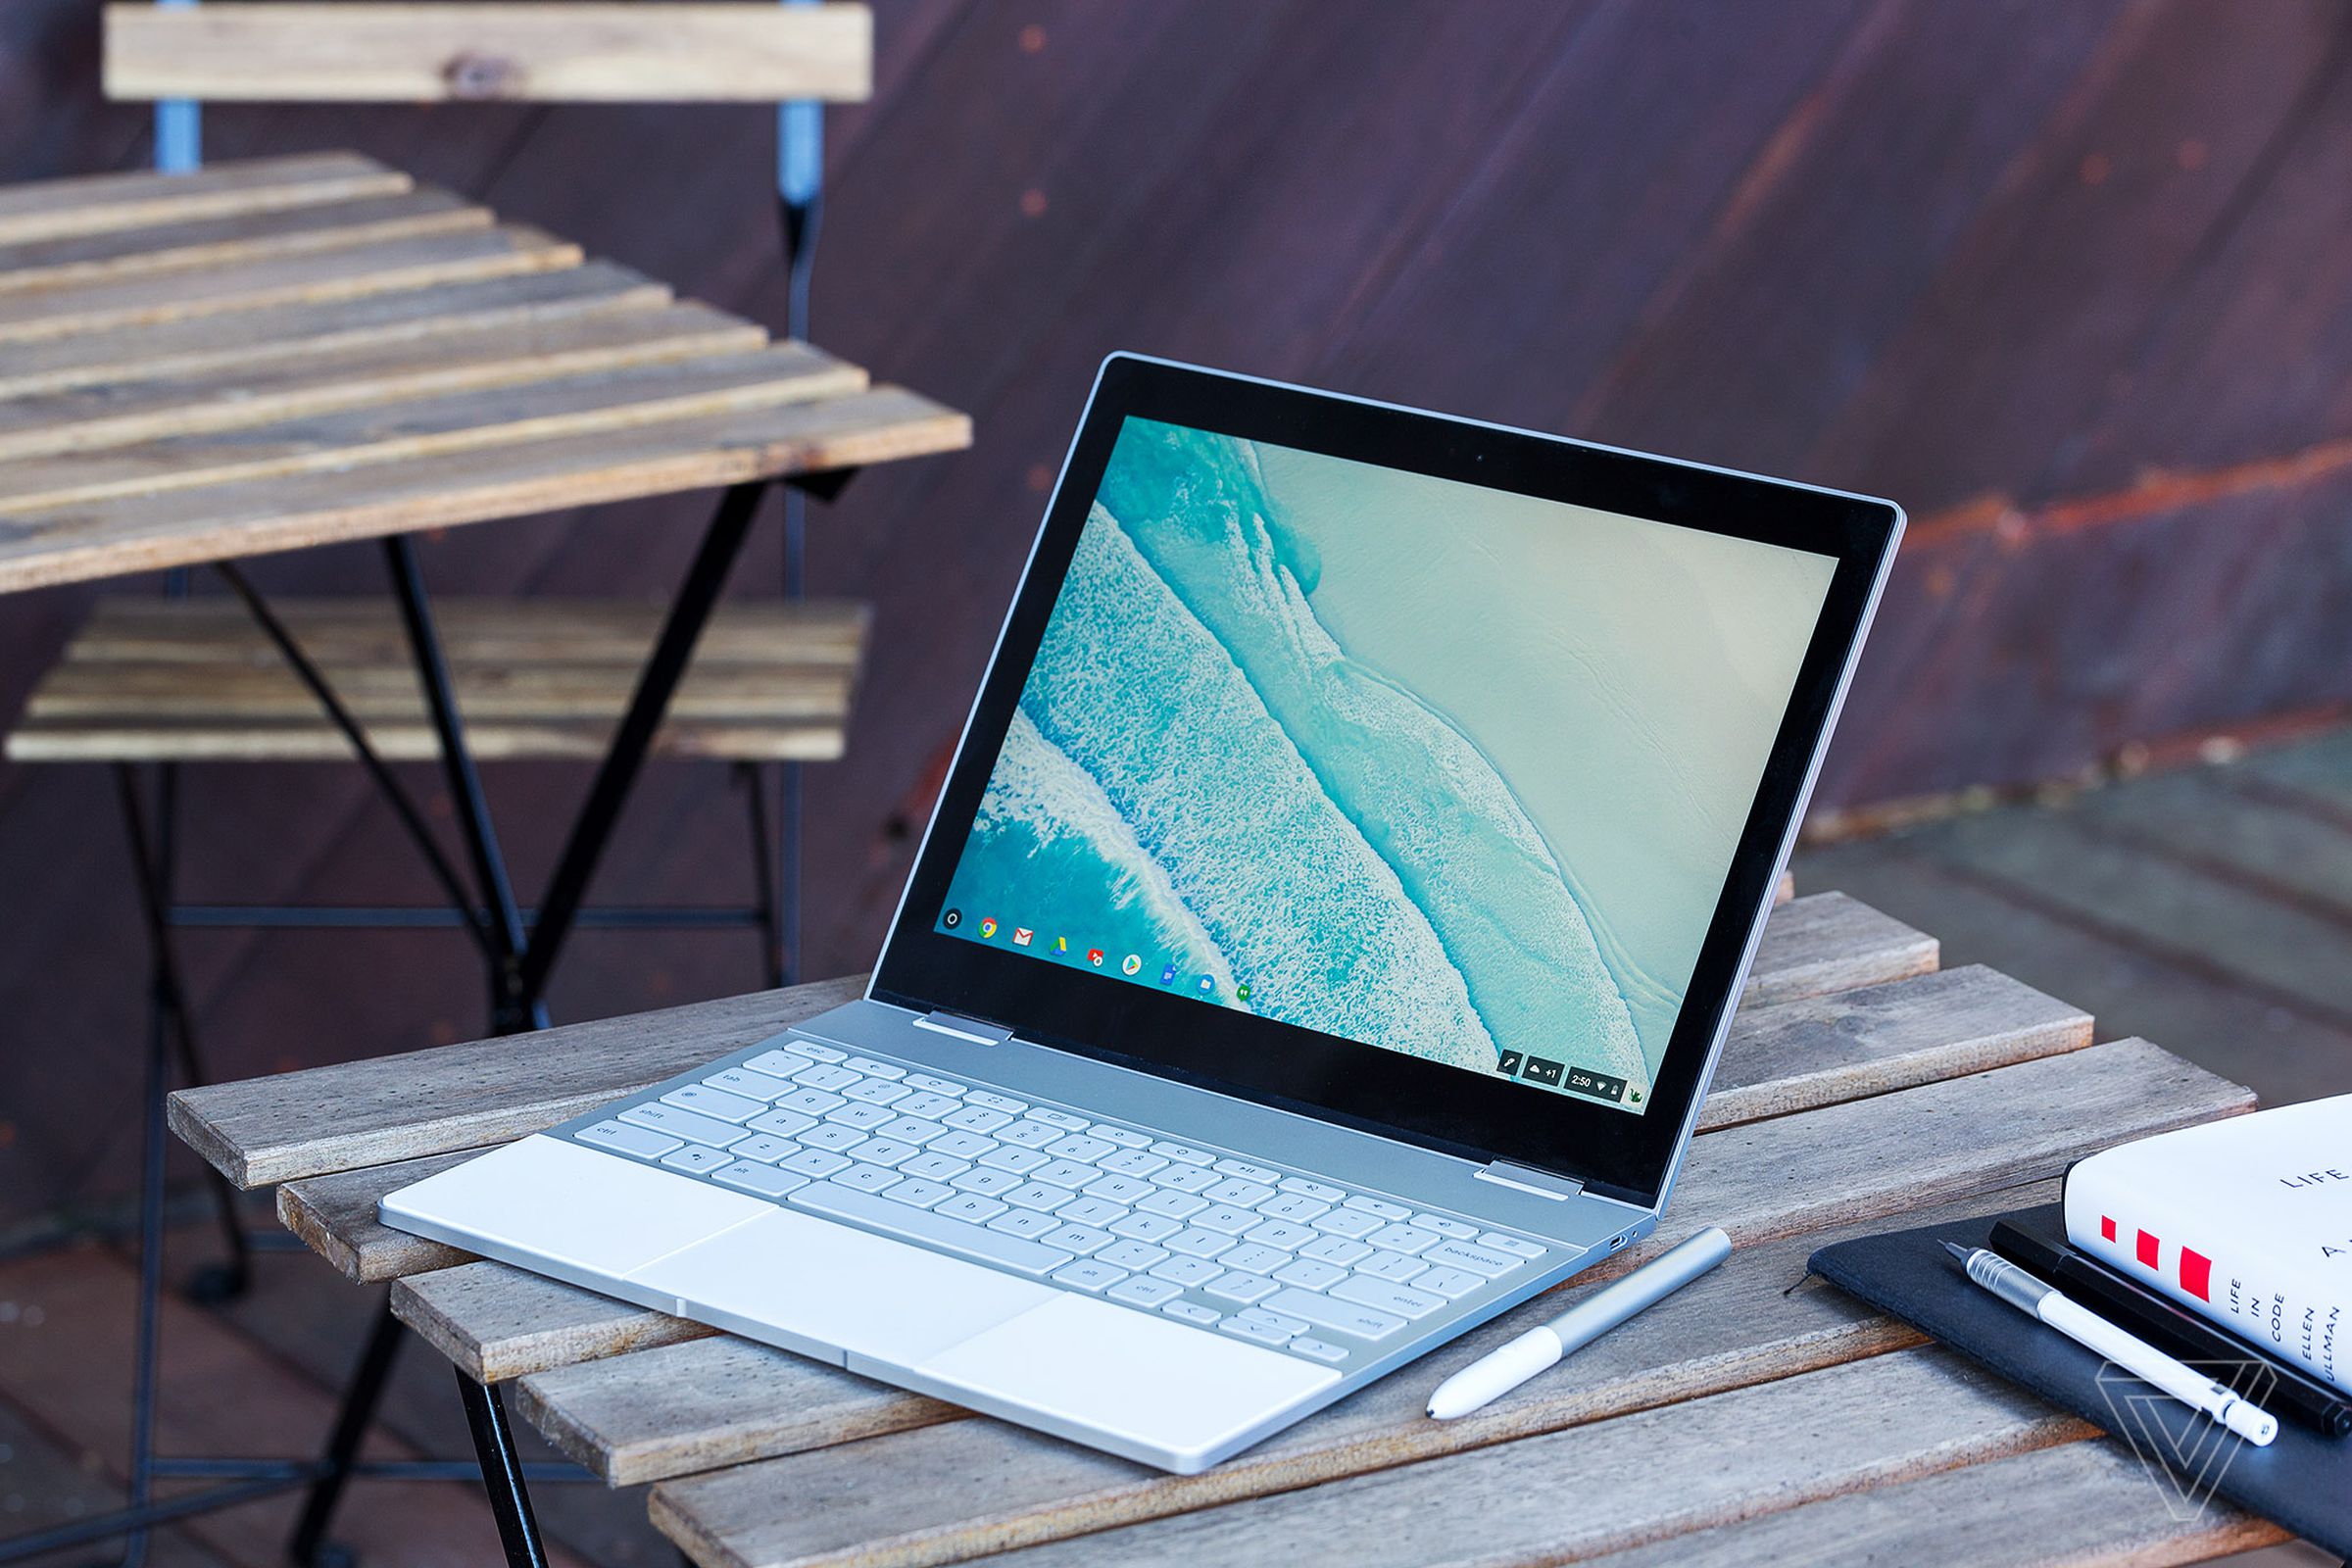 Google’s original Pixelbook was meant to show off all the things a Chromebook could do.